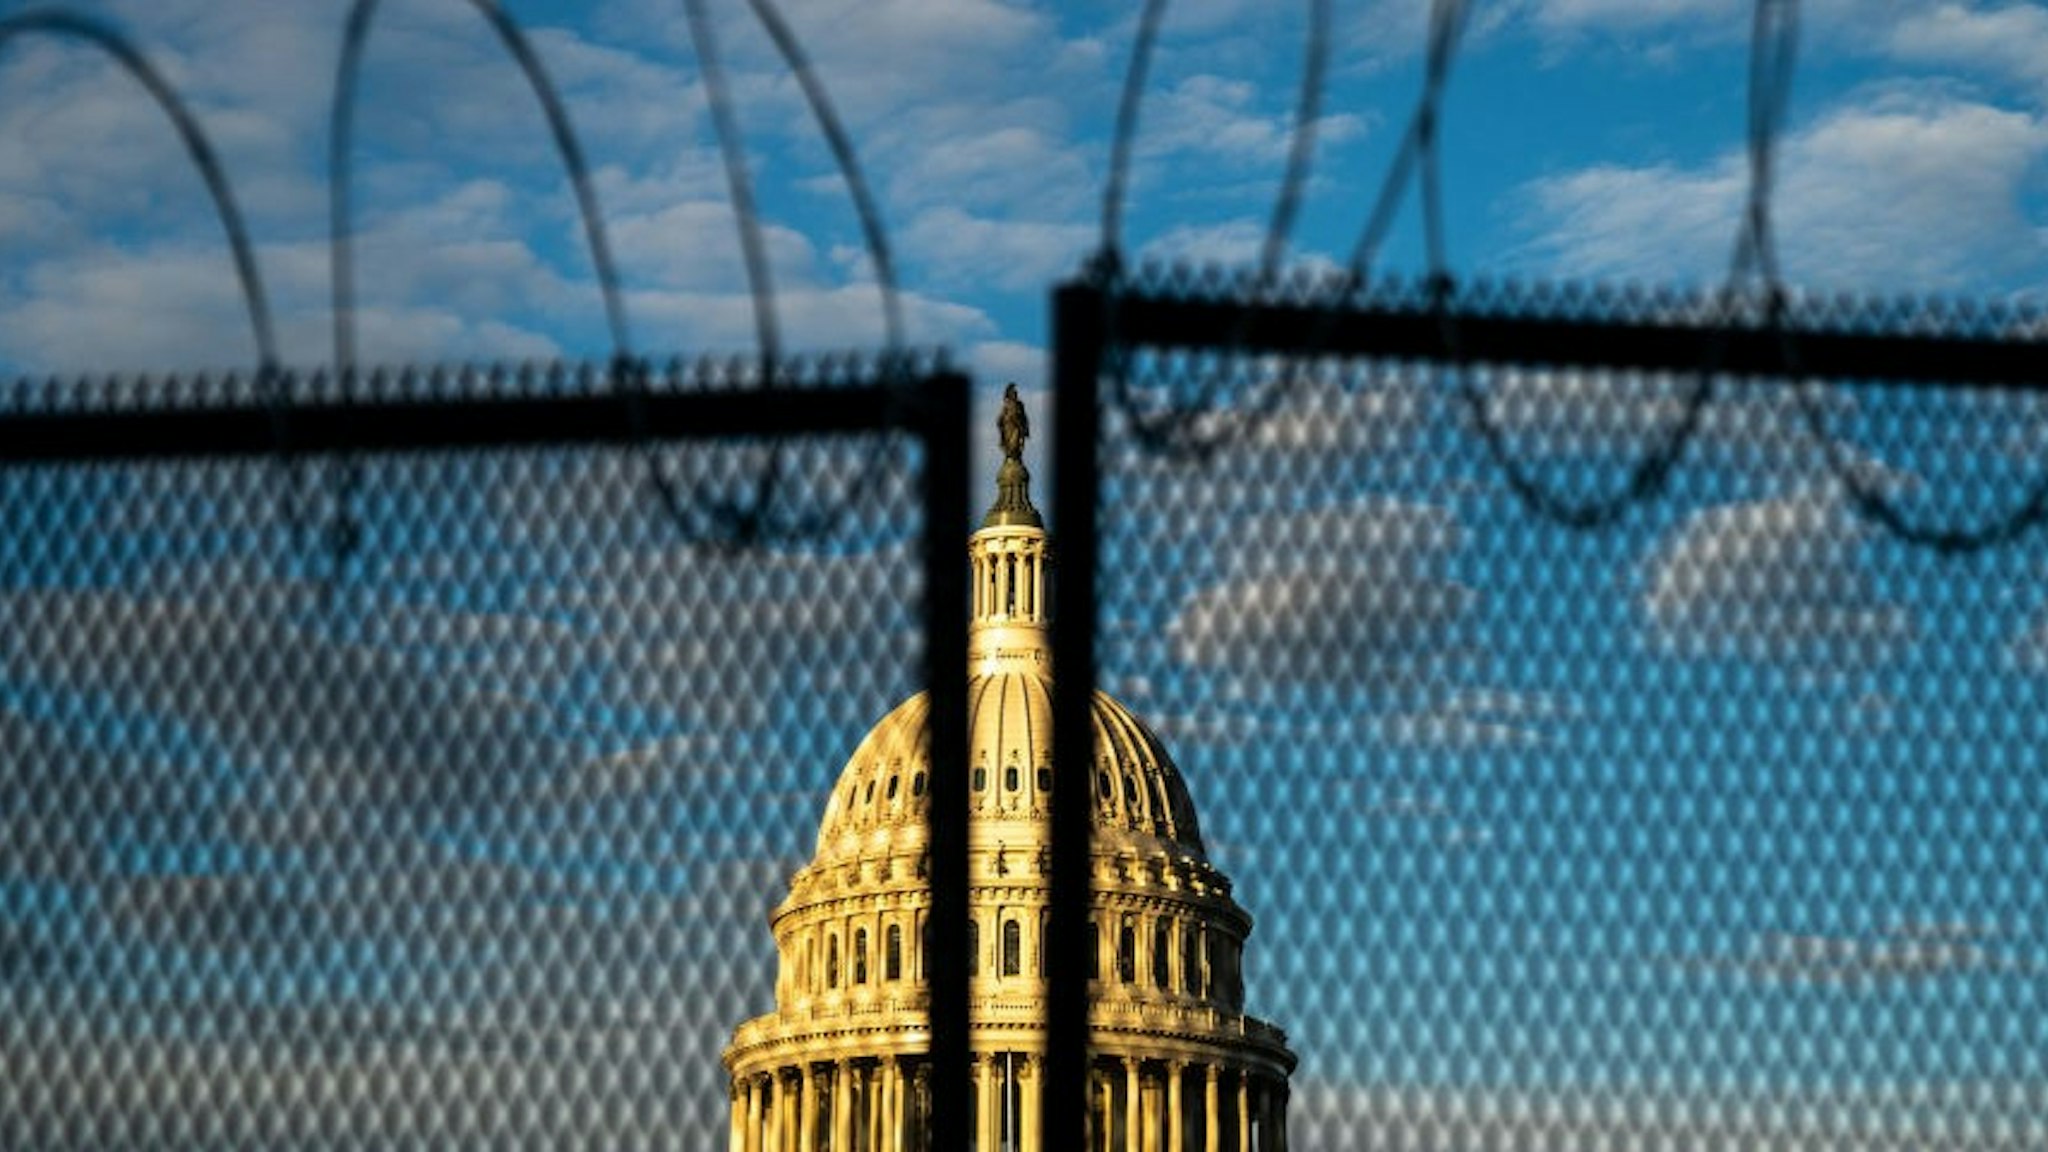 WASHINGTON, DC - JANUARY 16: Barbed wire, is seen atop security fencing, with the dome of the U.S. Capitol Building on Saturday, Jan. 16, 2021 in Washington, DC. After last week's riots and security breach at the U.S. Capitol Building, the FBI has warned of additional threats in the nation's capital and across all 50 states. (